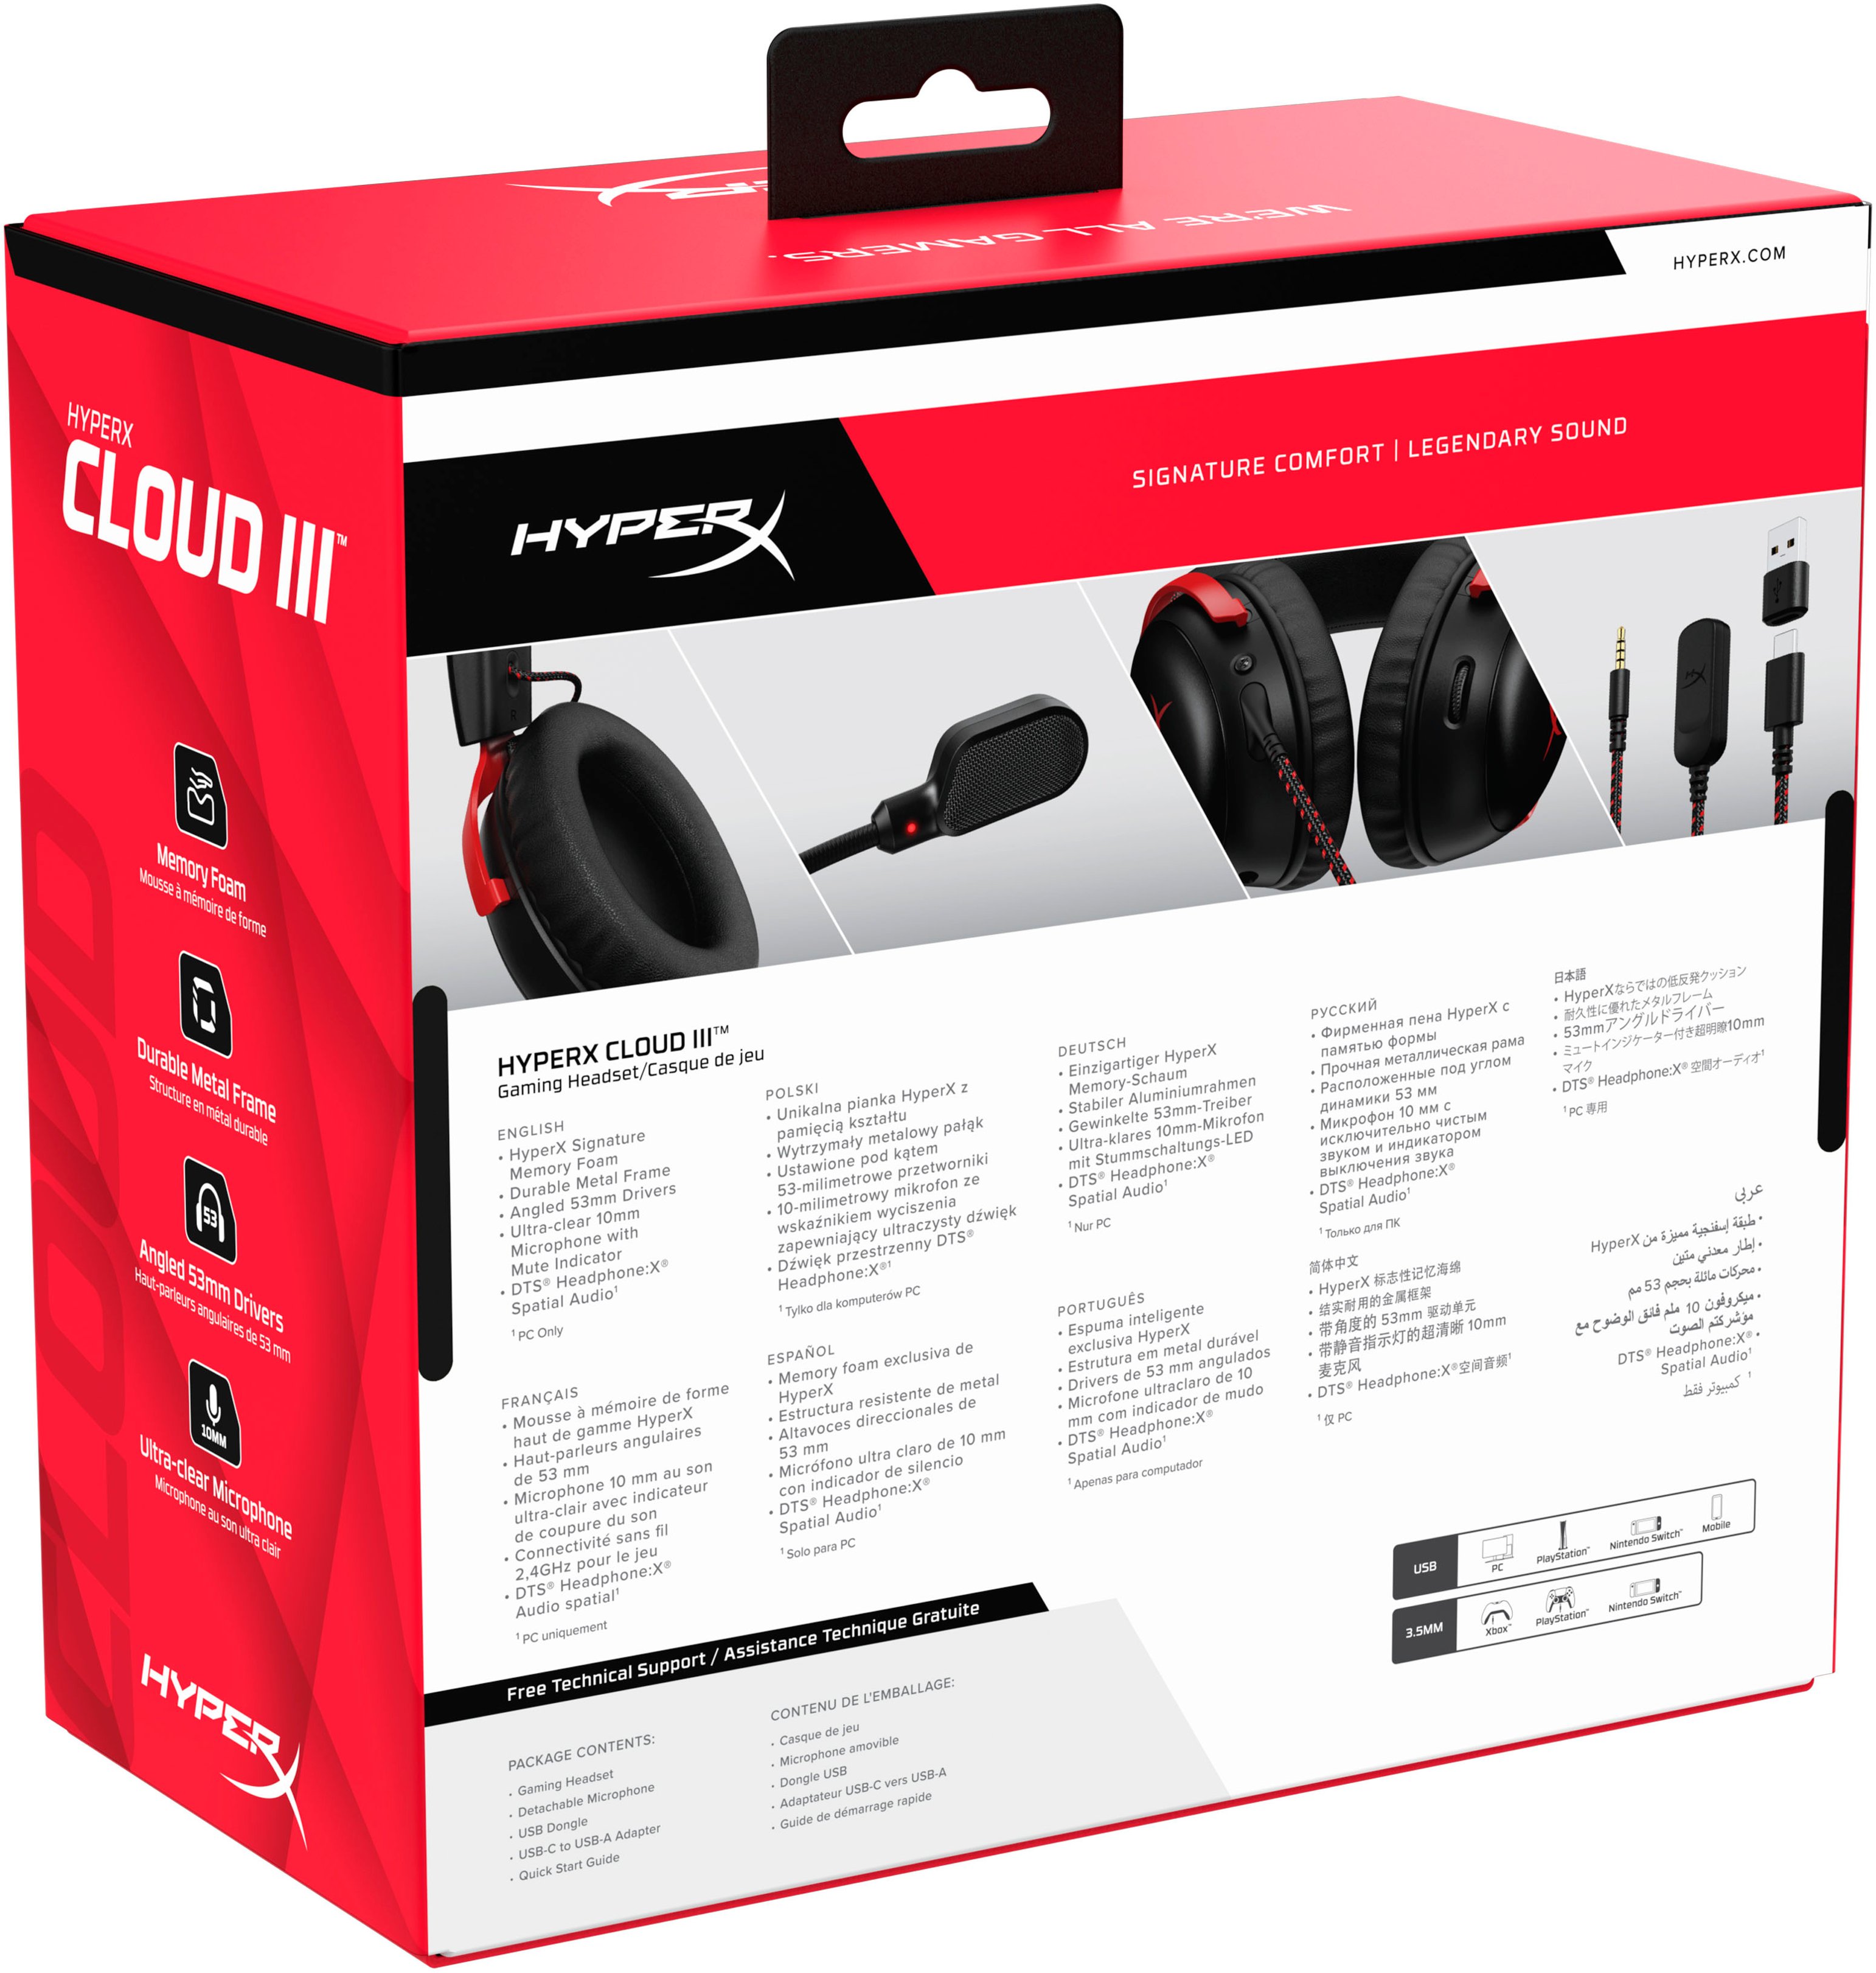 X|S, Nintendo Buy One, Xbox PS5, PC, Xbox HyperX Headset PS4, Mobile 727A9AA Best for Switch, Wired - Black/Red Cloud Gaming and Series III